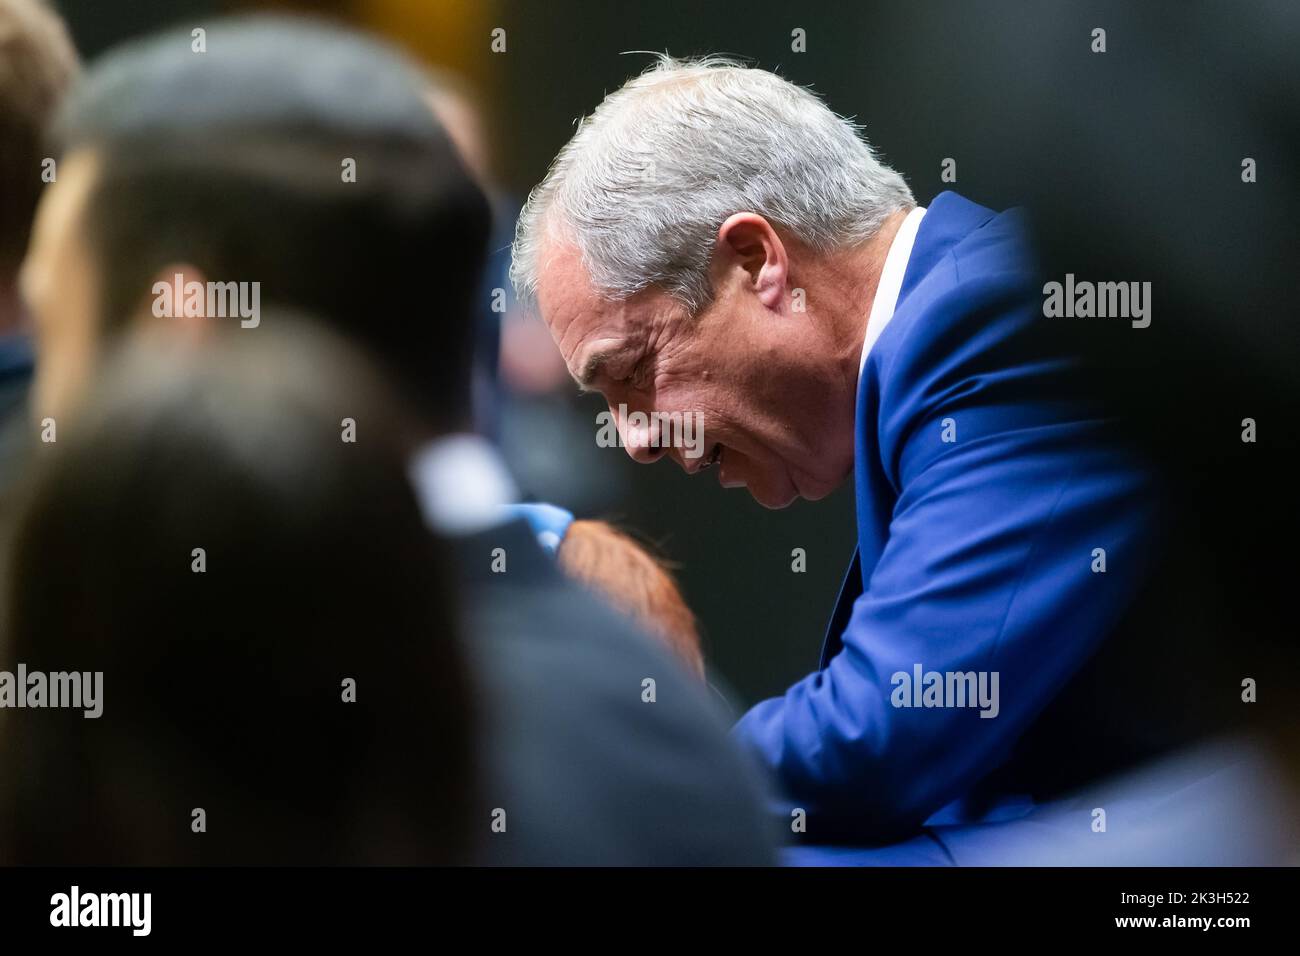 Melbourne, Australia, 26 September, 2022. Nigel Farage is seen chatting to audience members during An Evening With Nigel Farage at The Melbourne Convention and Exhibition Centre on September 26, 2022 in Melbourne, Australia. Credit: Dave Hewison/Speed Media/Alamy Live News Stock Photo